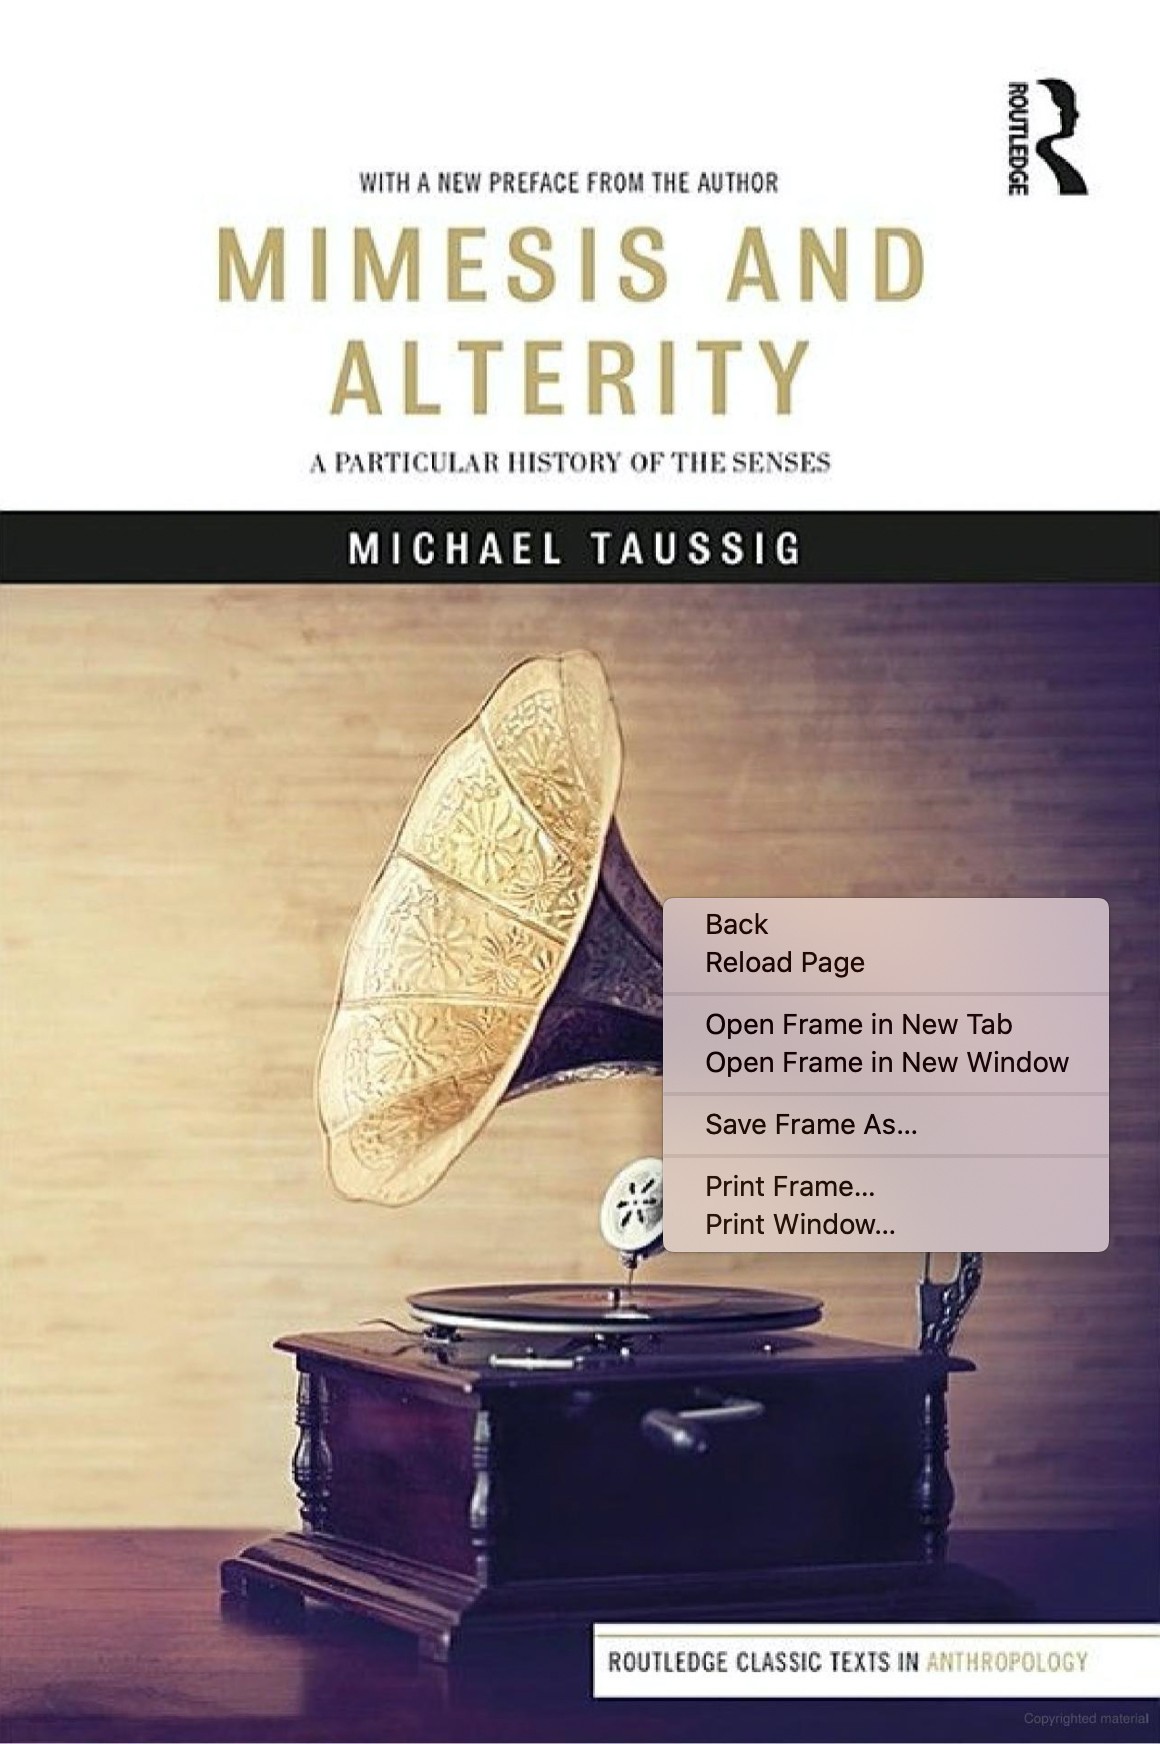 Book Cover: Michael Taussig, Mimesis and Alterity